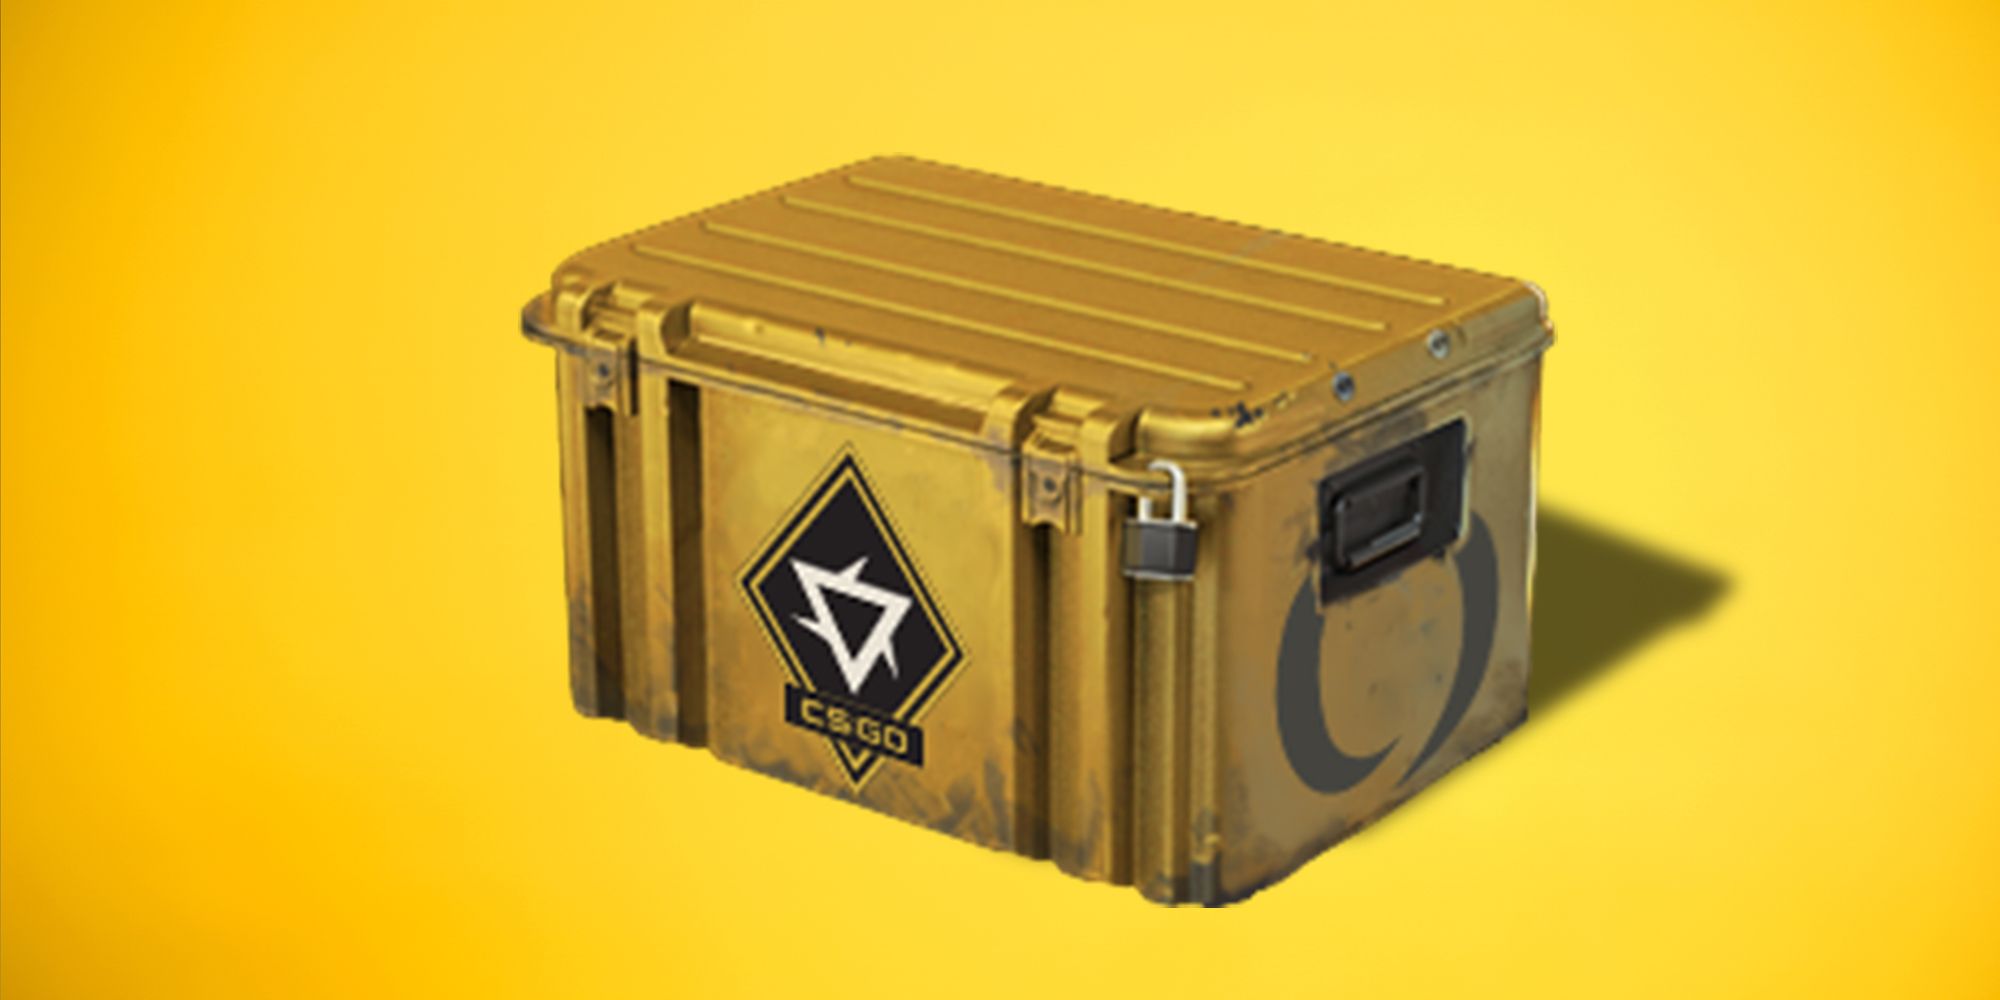 CS:GO Cases Suddenly Collapse In Value As Valve Releases New Skins